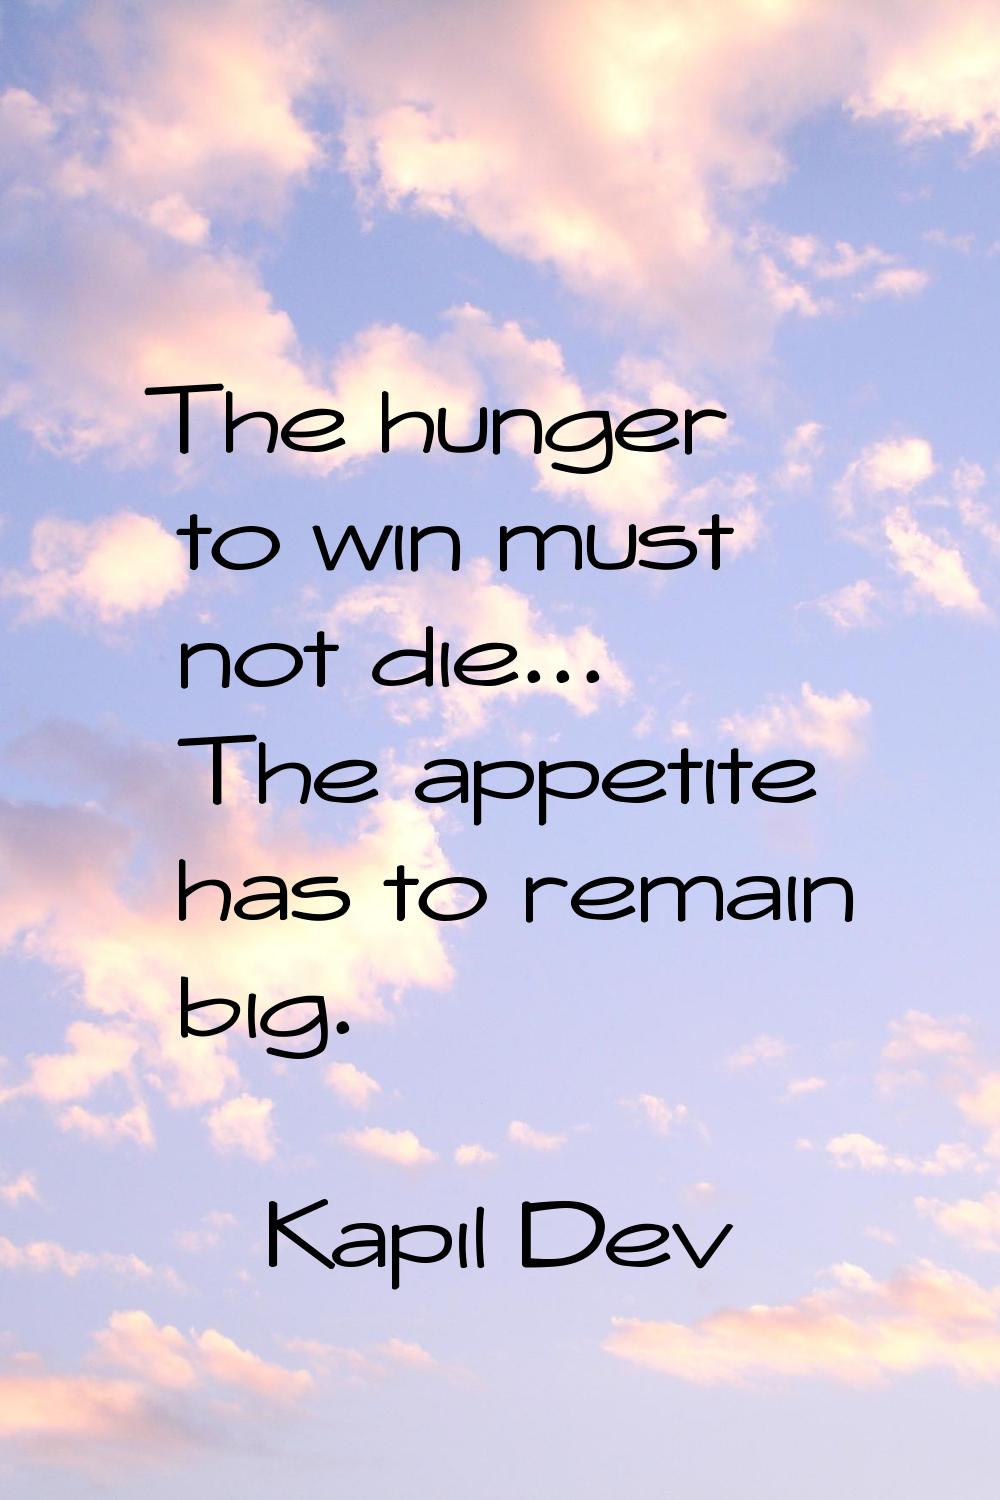 The hunger to win must not die... The appetite has to remain big.